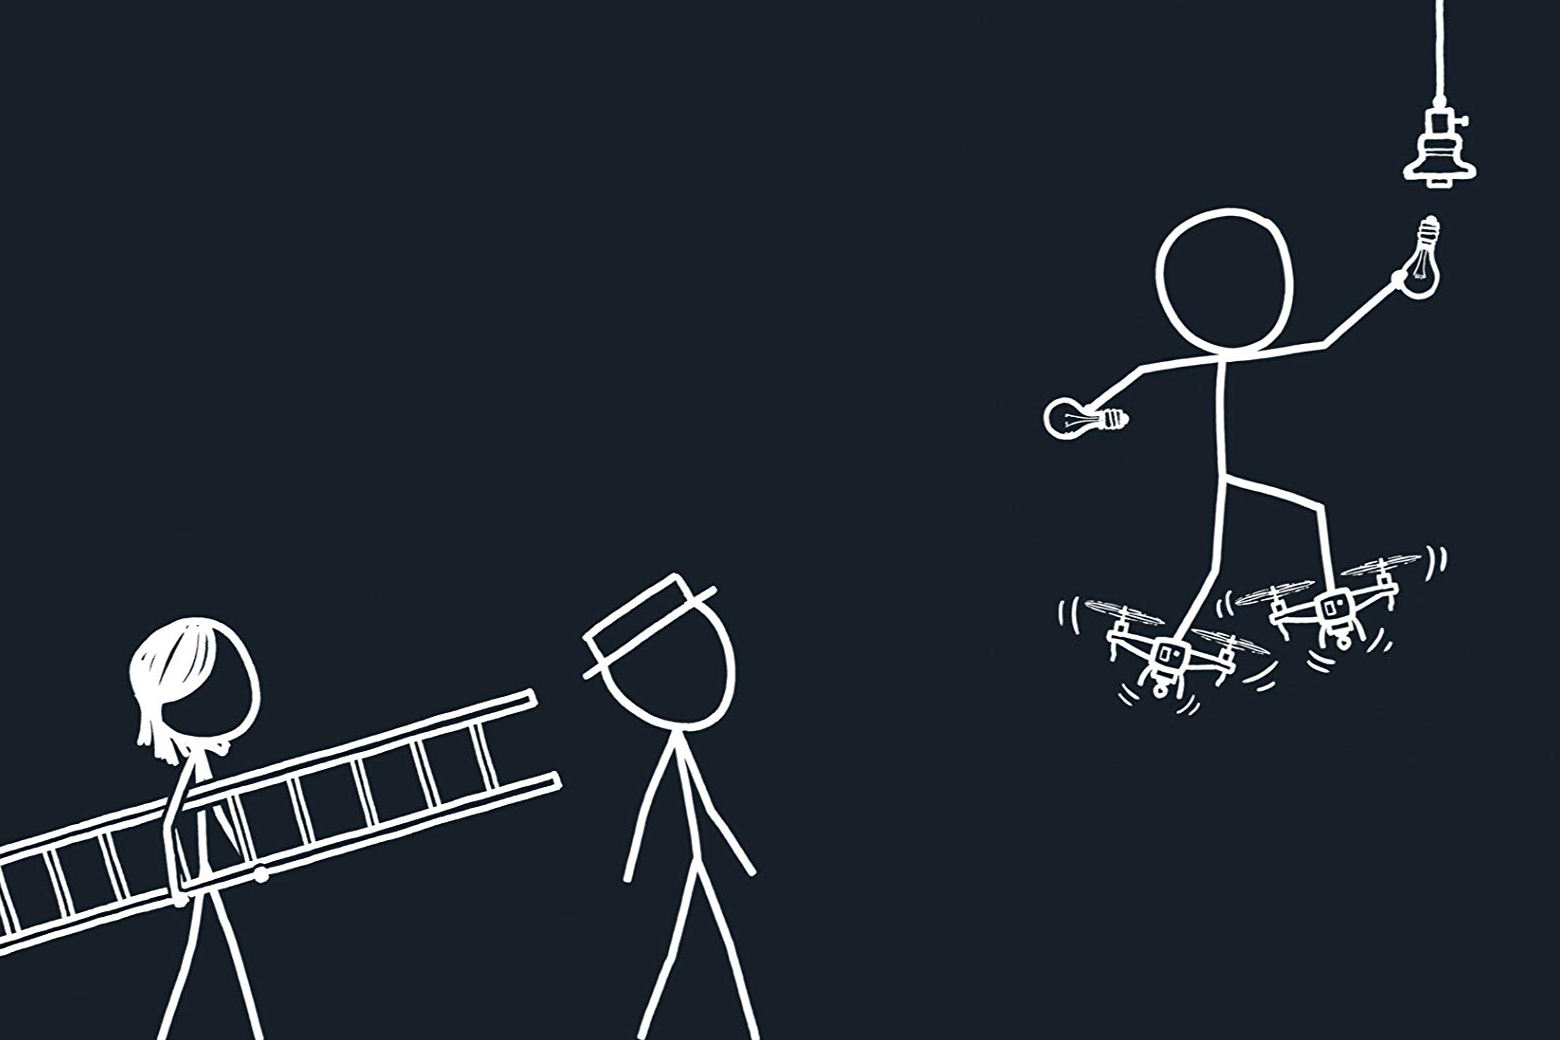 Cover: One female-looking stick figure carries a ladder while seemingly following a stick figure wearing a hat; a third stick figure stands on two drones while trying to replace a lightbulb.